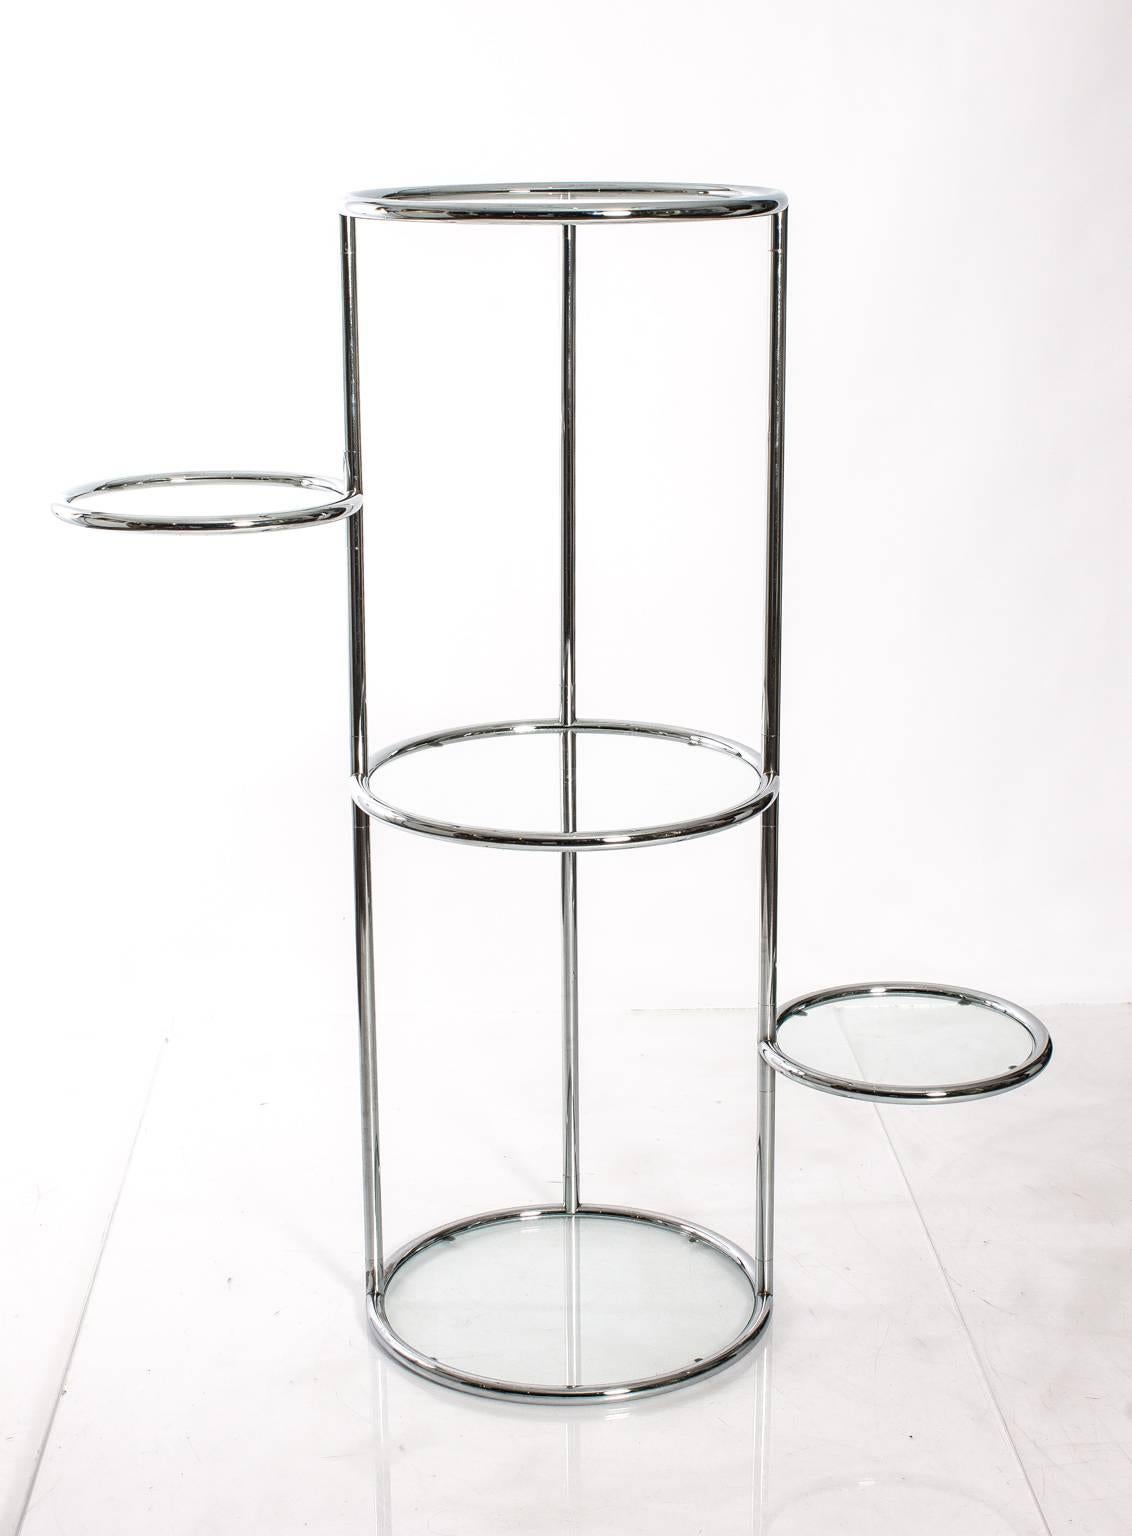 Late 20th Century Modern Chrome and Glass Étagère For Sale